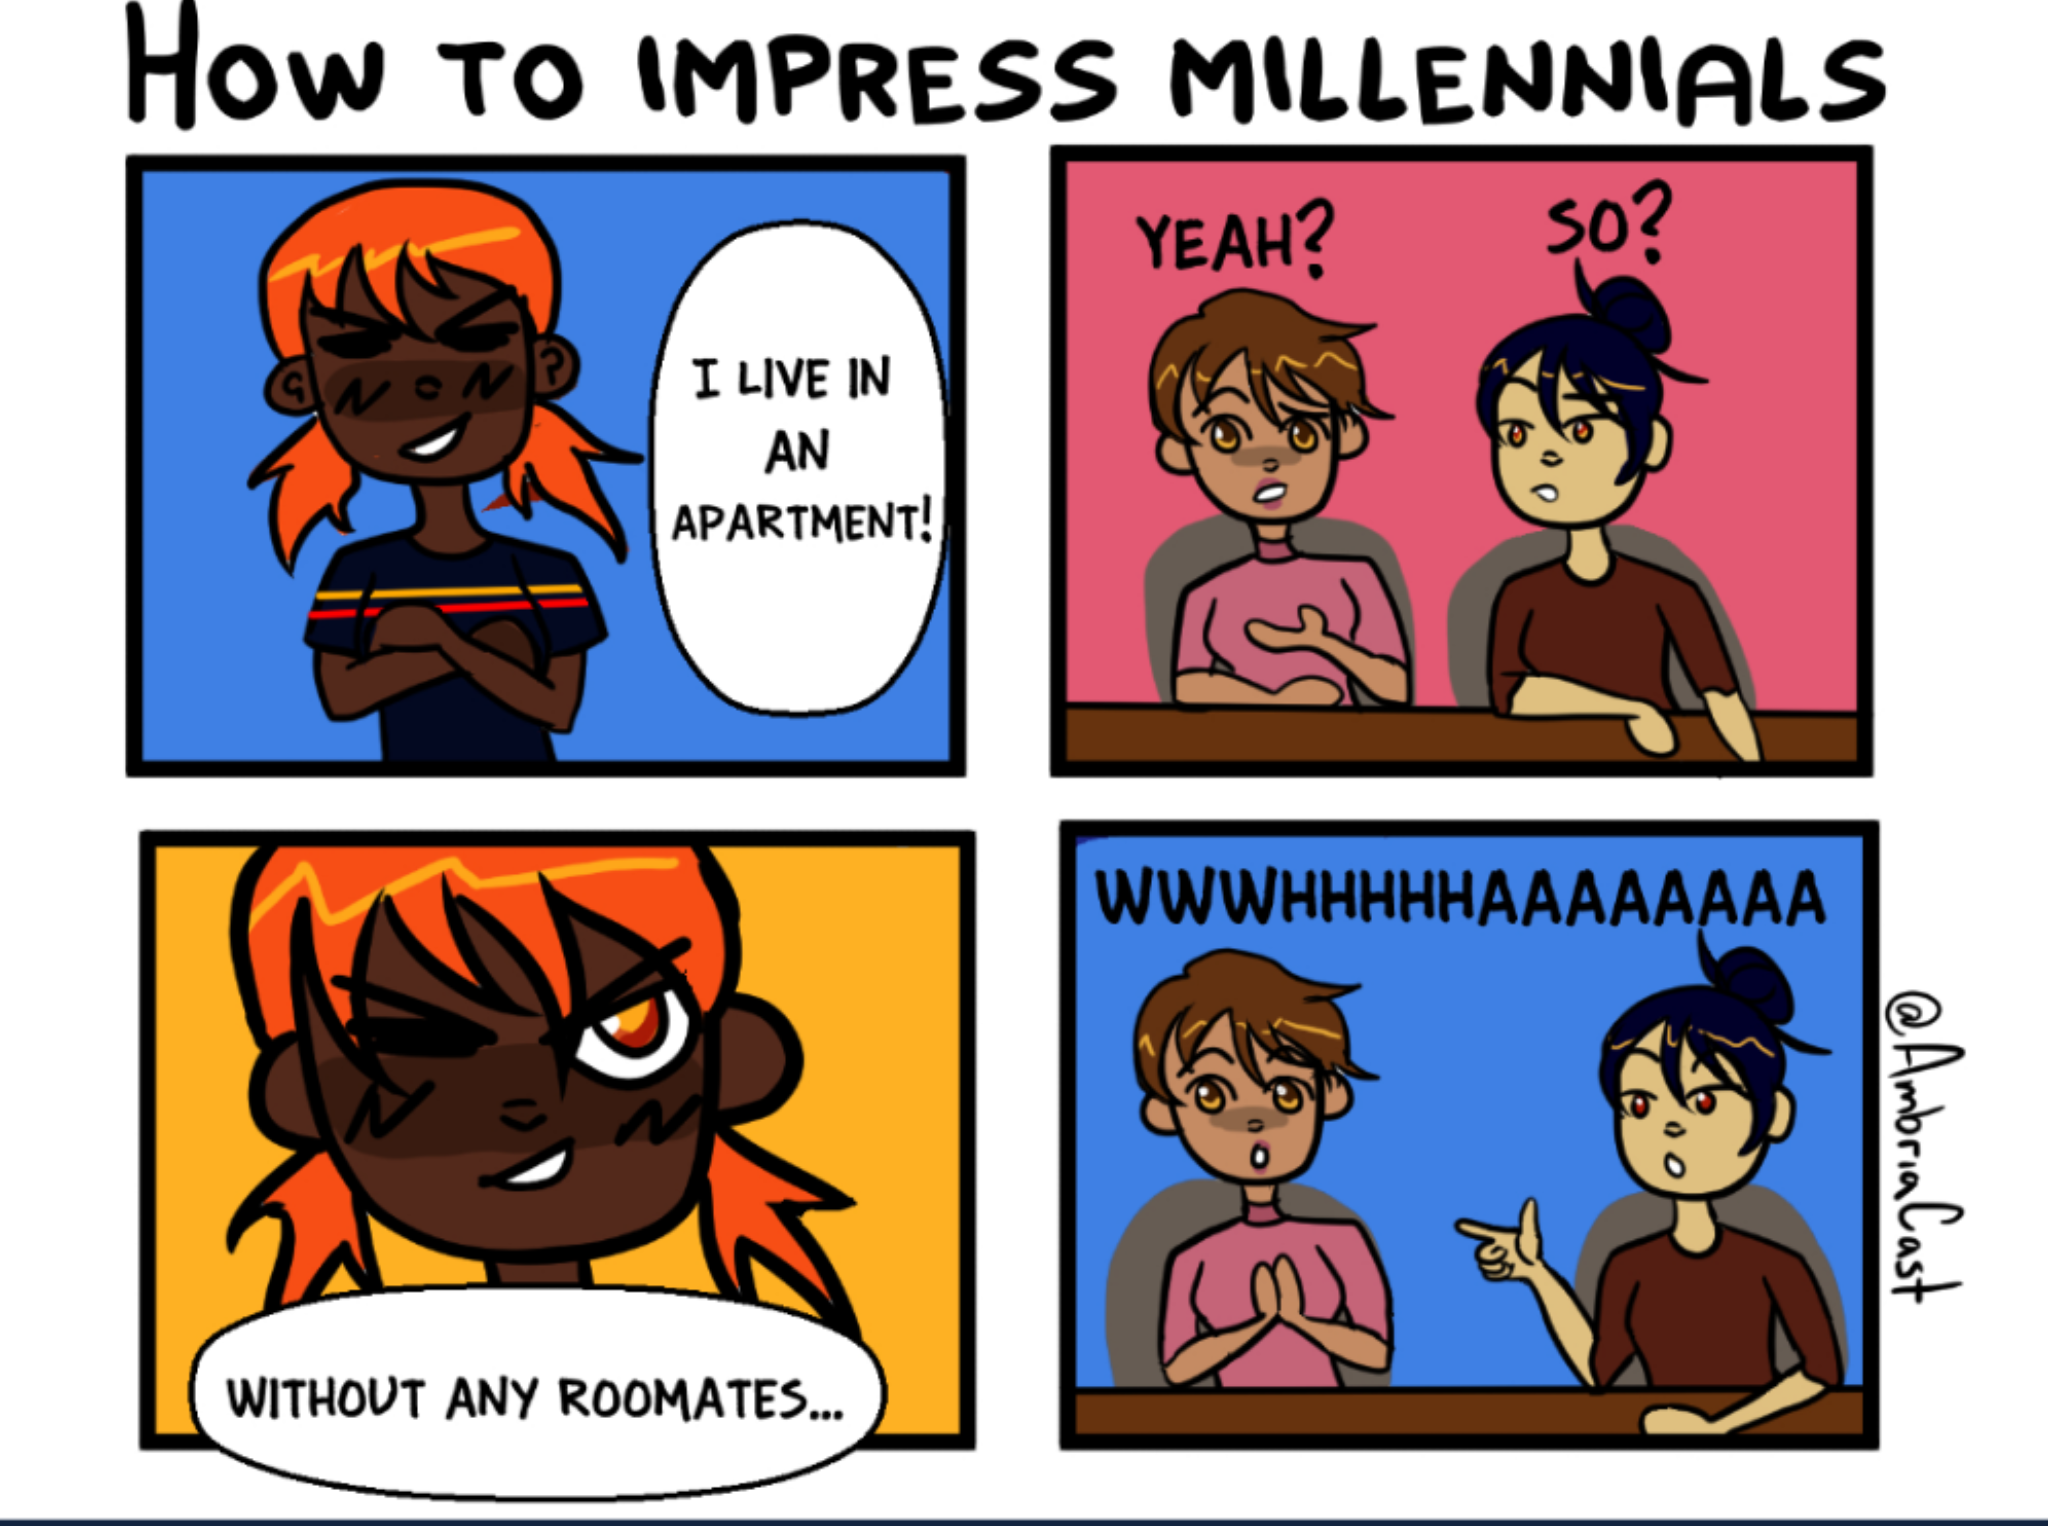 How you really impress my generation!